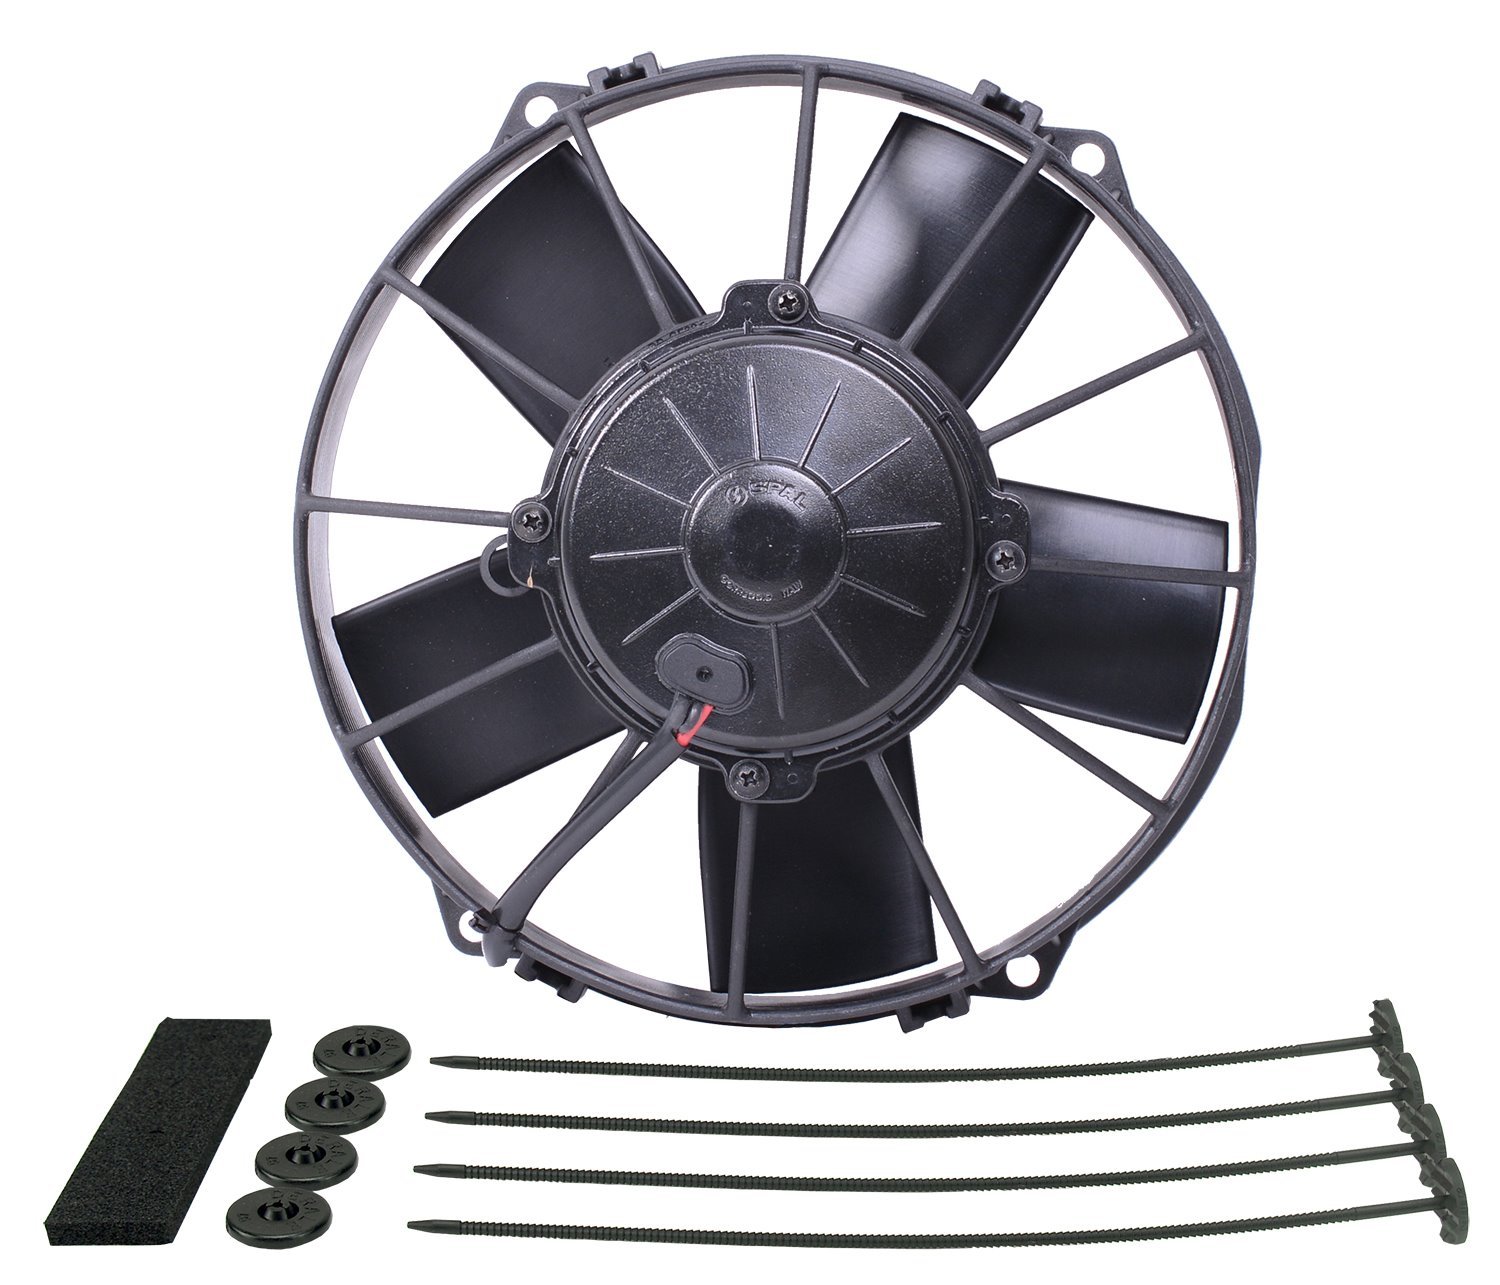 High-Output Extreme Fan